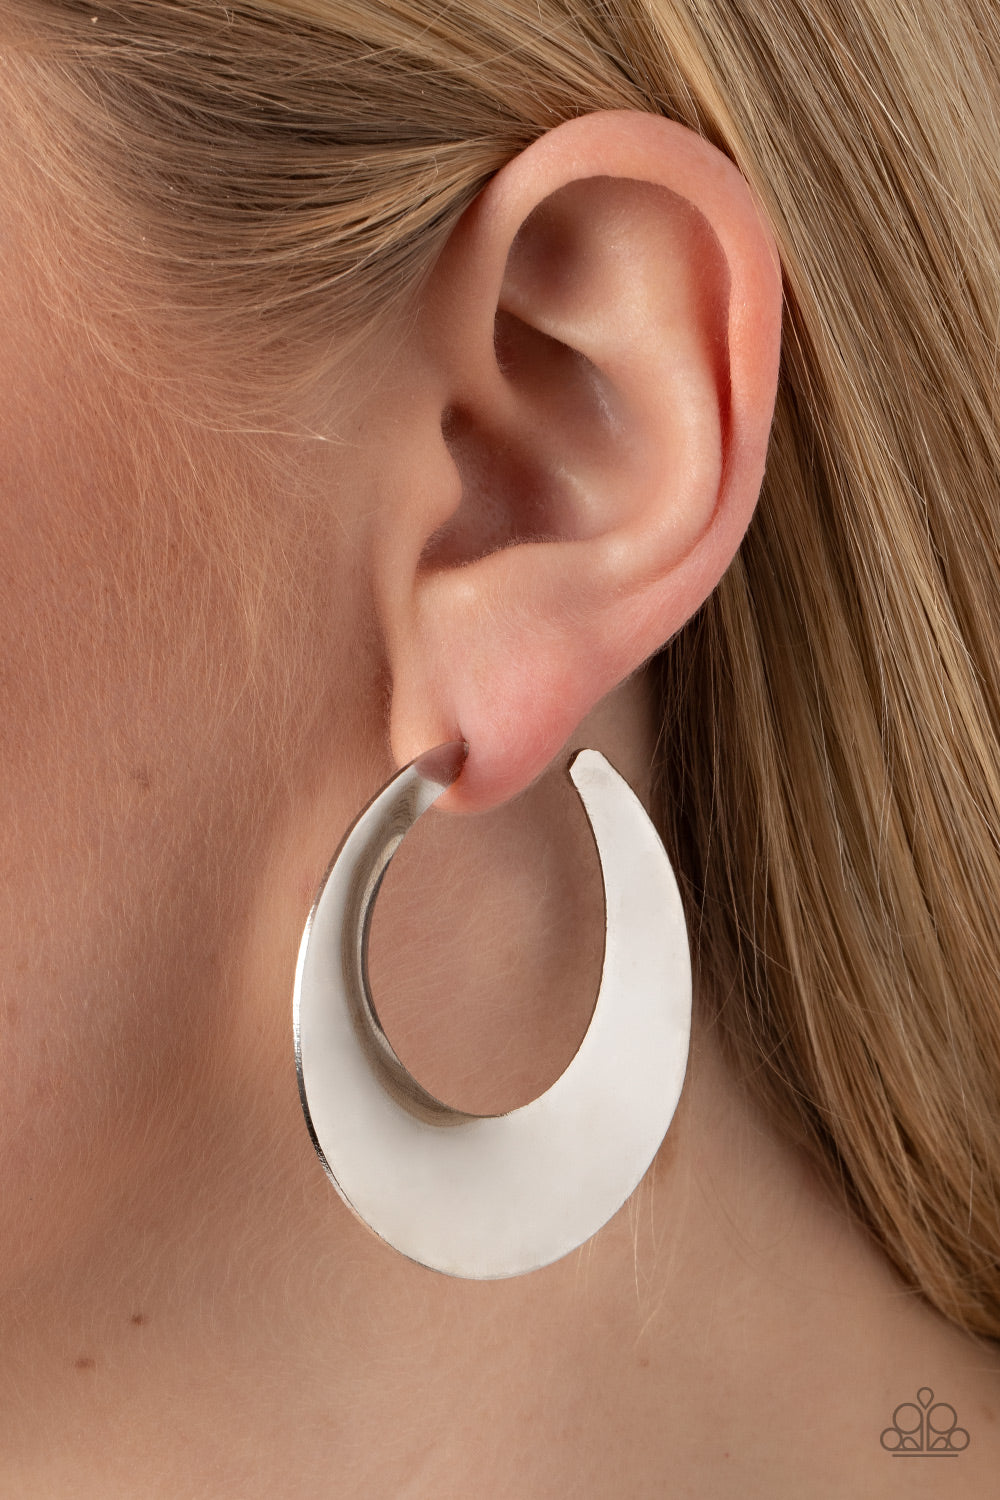 Power Curves Silver Hoop Earring - Paparazzi Accessories  A flat silver hoop widens and bevels at the center, curving into a dramatic shimmer. Earring attaches to a standard post fitting. Hoop measures approximately 2" in diameter.  Sold as one pair of hoop earrings.